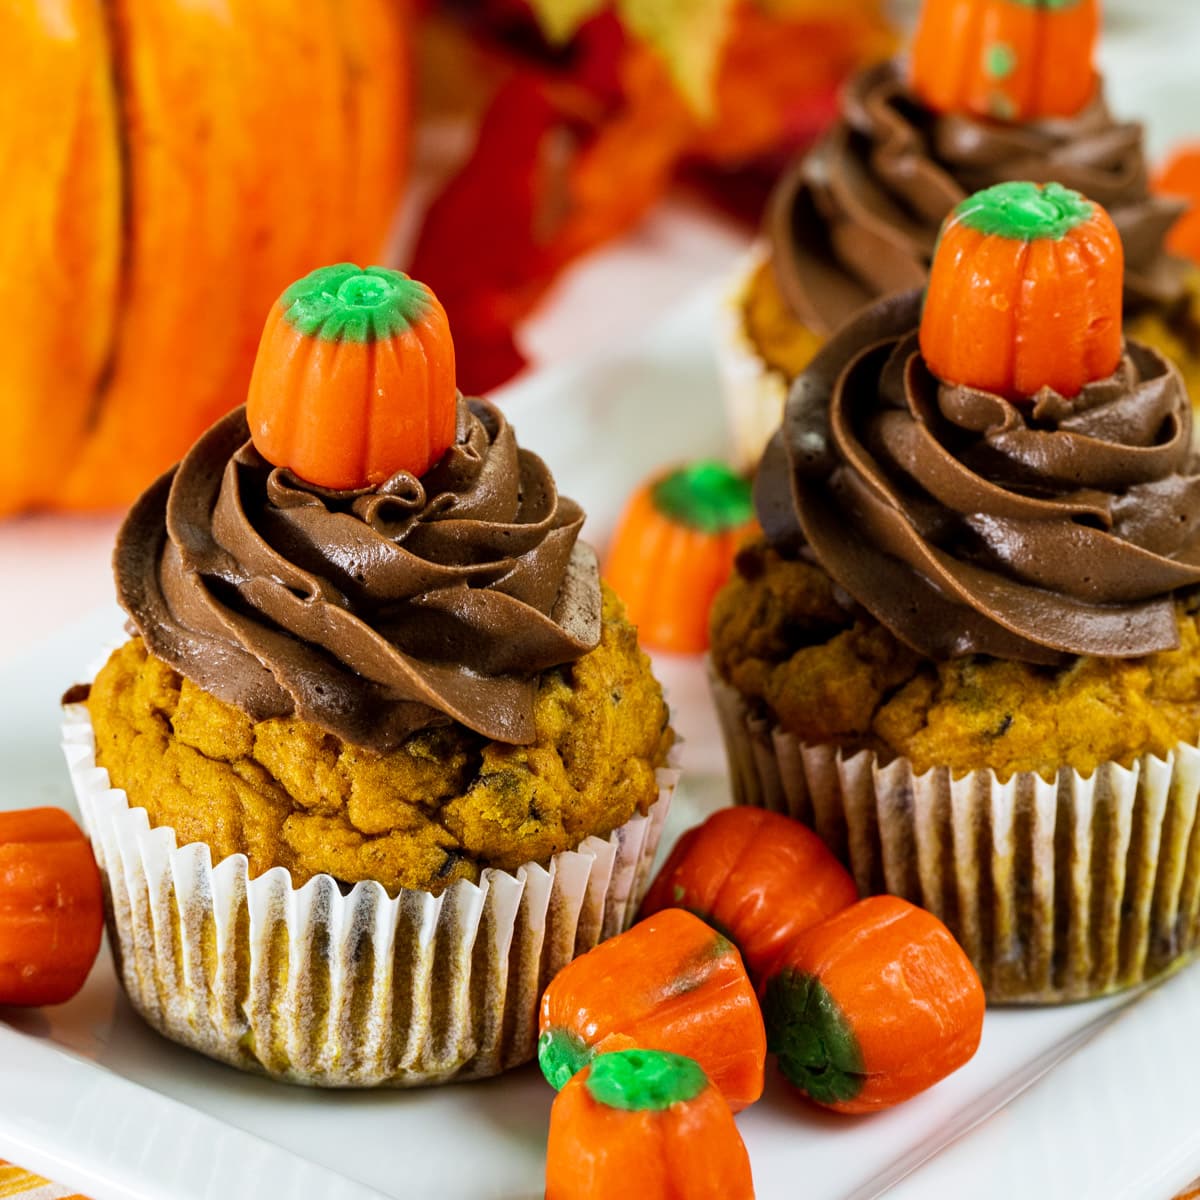 Pumpkin Chocolate Chip Cupcakes with Chocolate Frosting